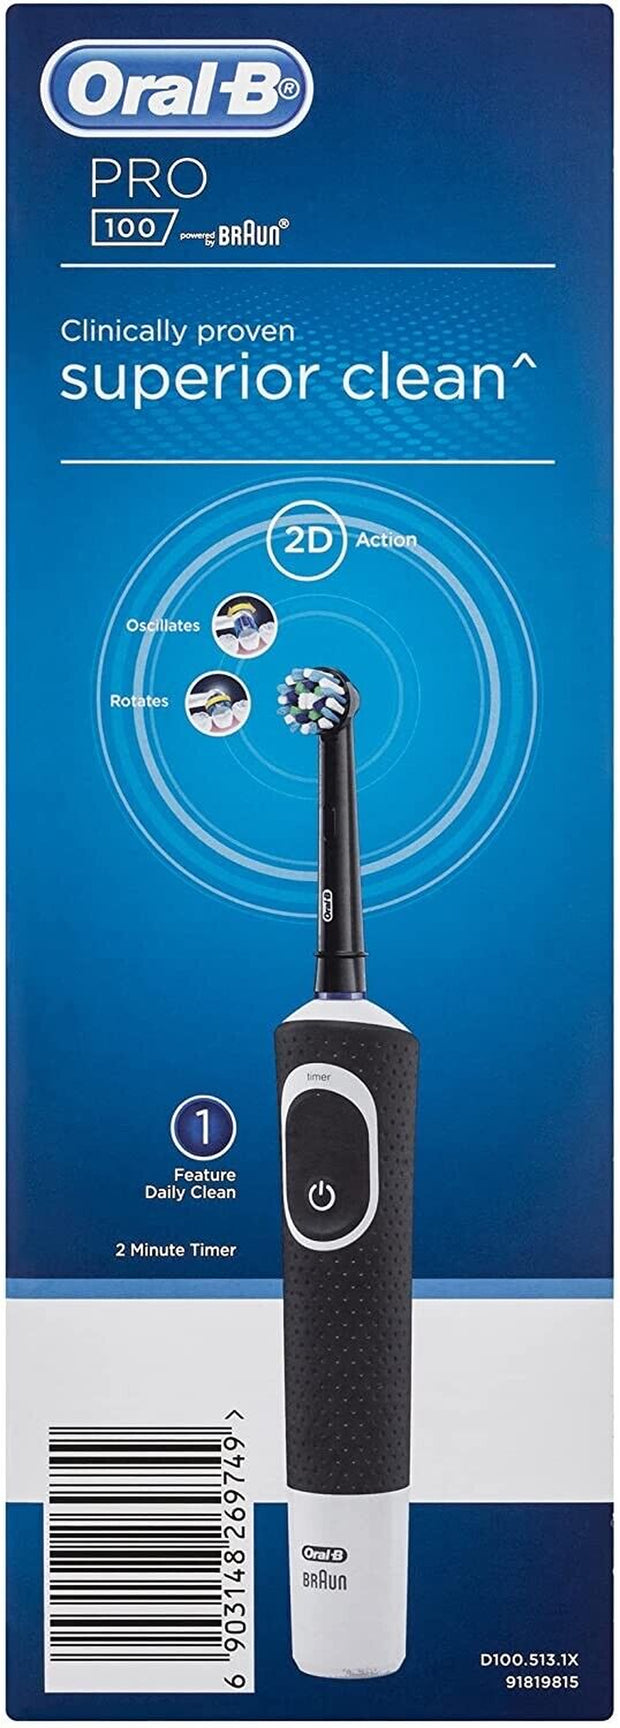 "Oral-B PRO 100 CROSSACTION Electric Toothbrush in Sleek Midnight Black - Rechargeable and Brand New!"